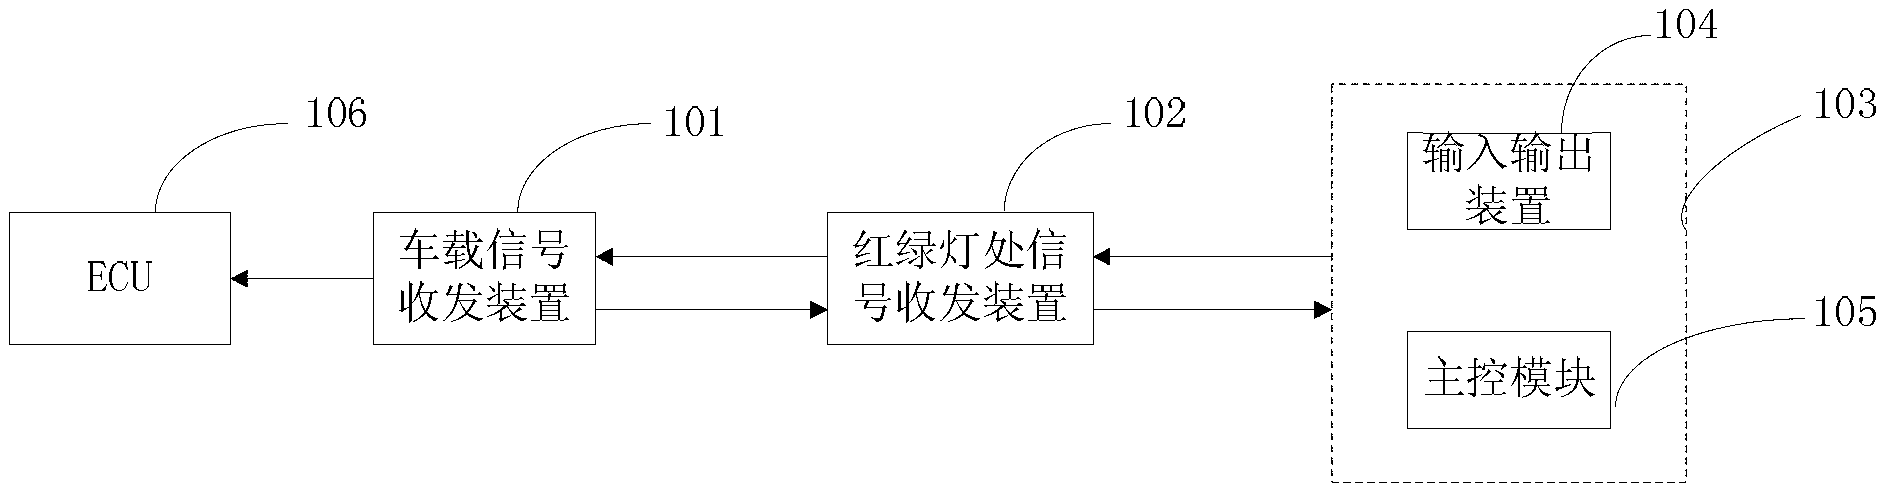 Red light violation prevention traffic safety system and method